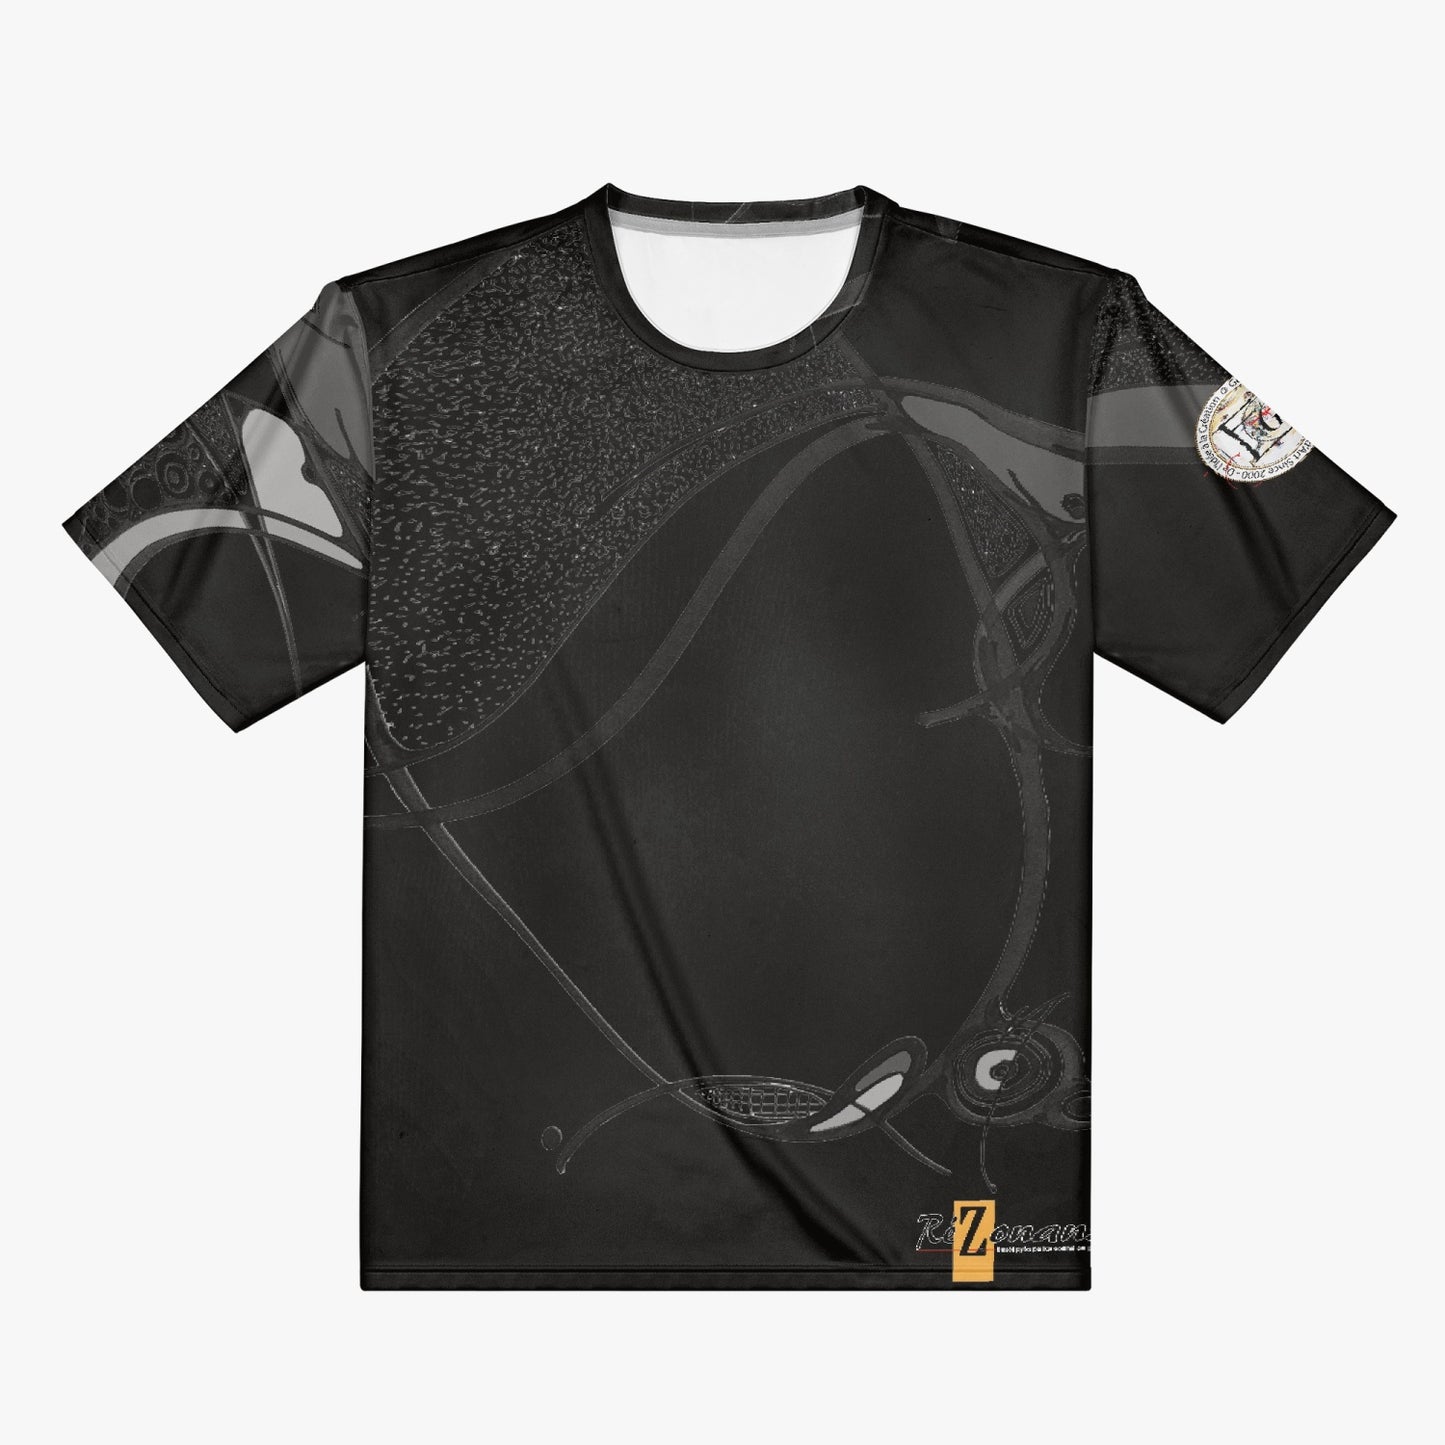 All-over "Blacone" t-shirt